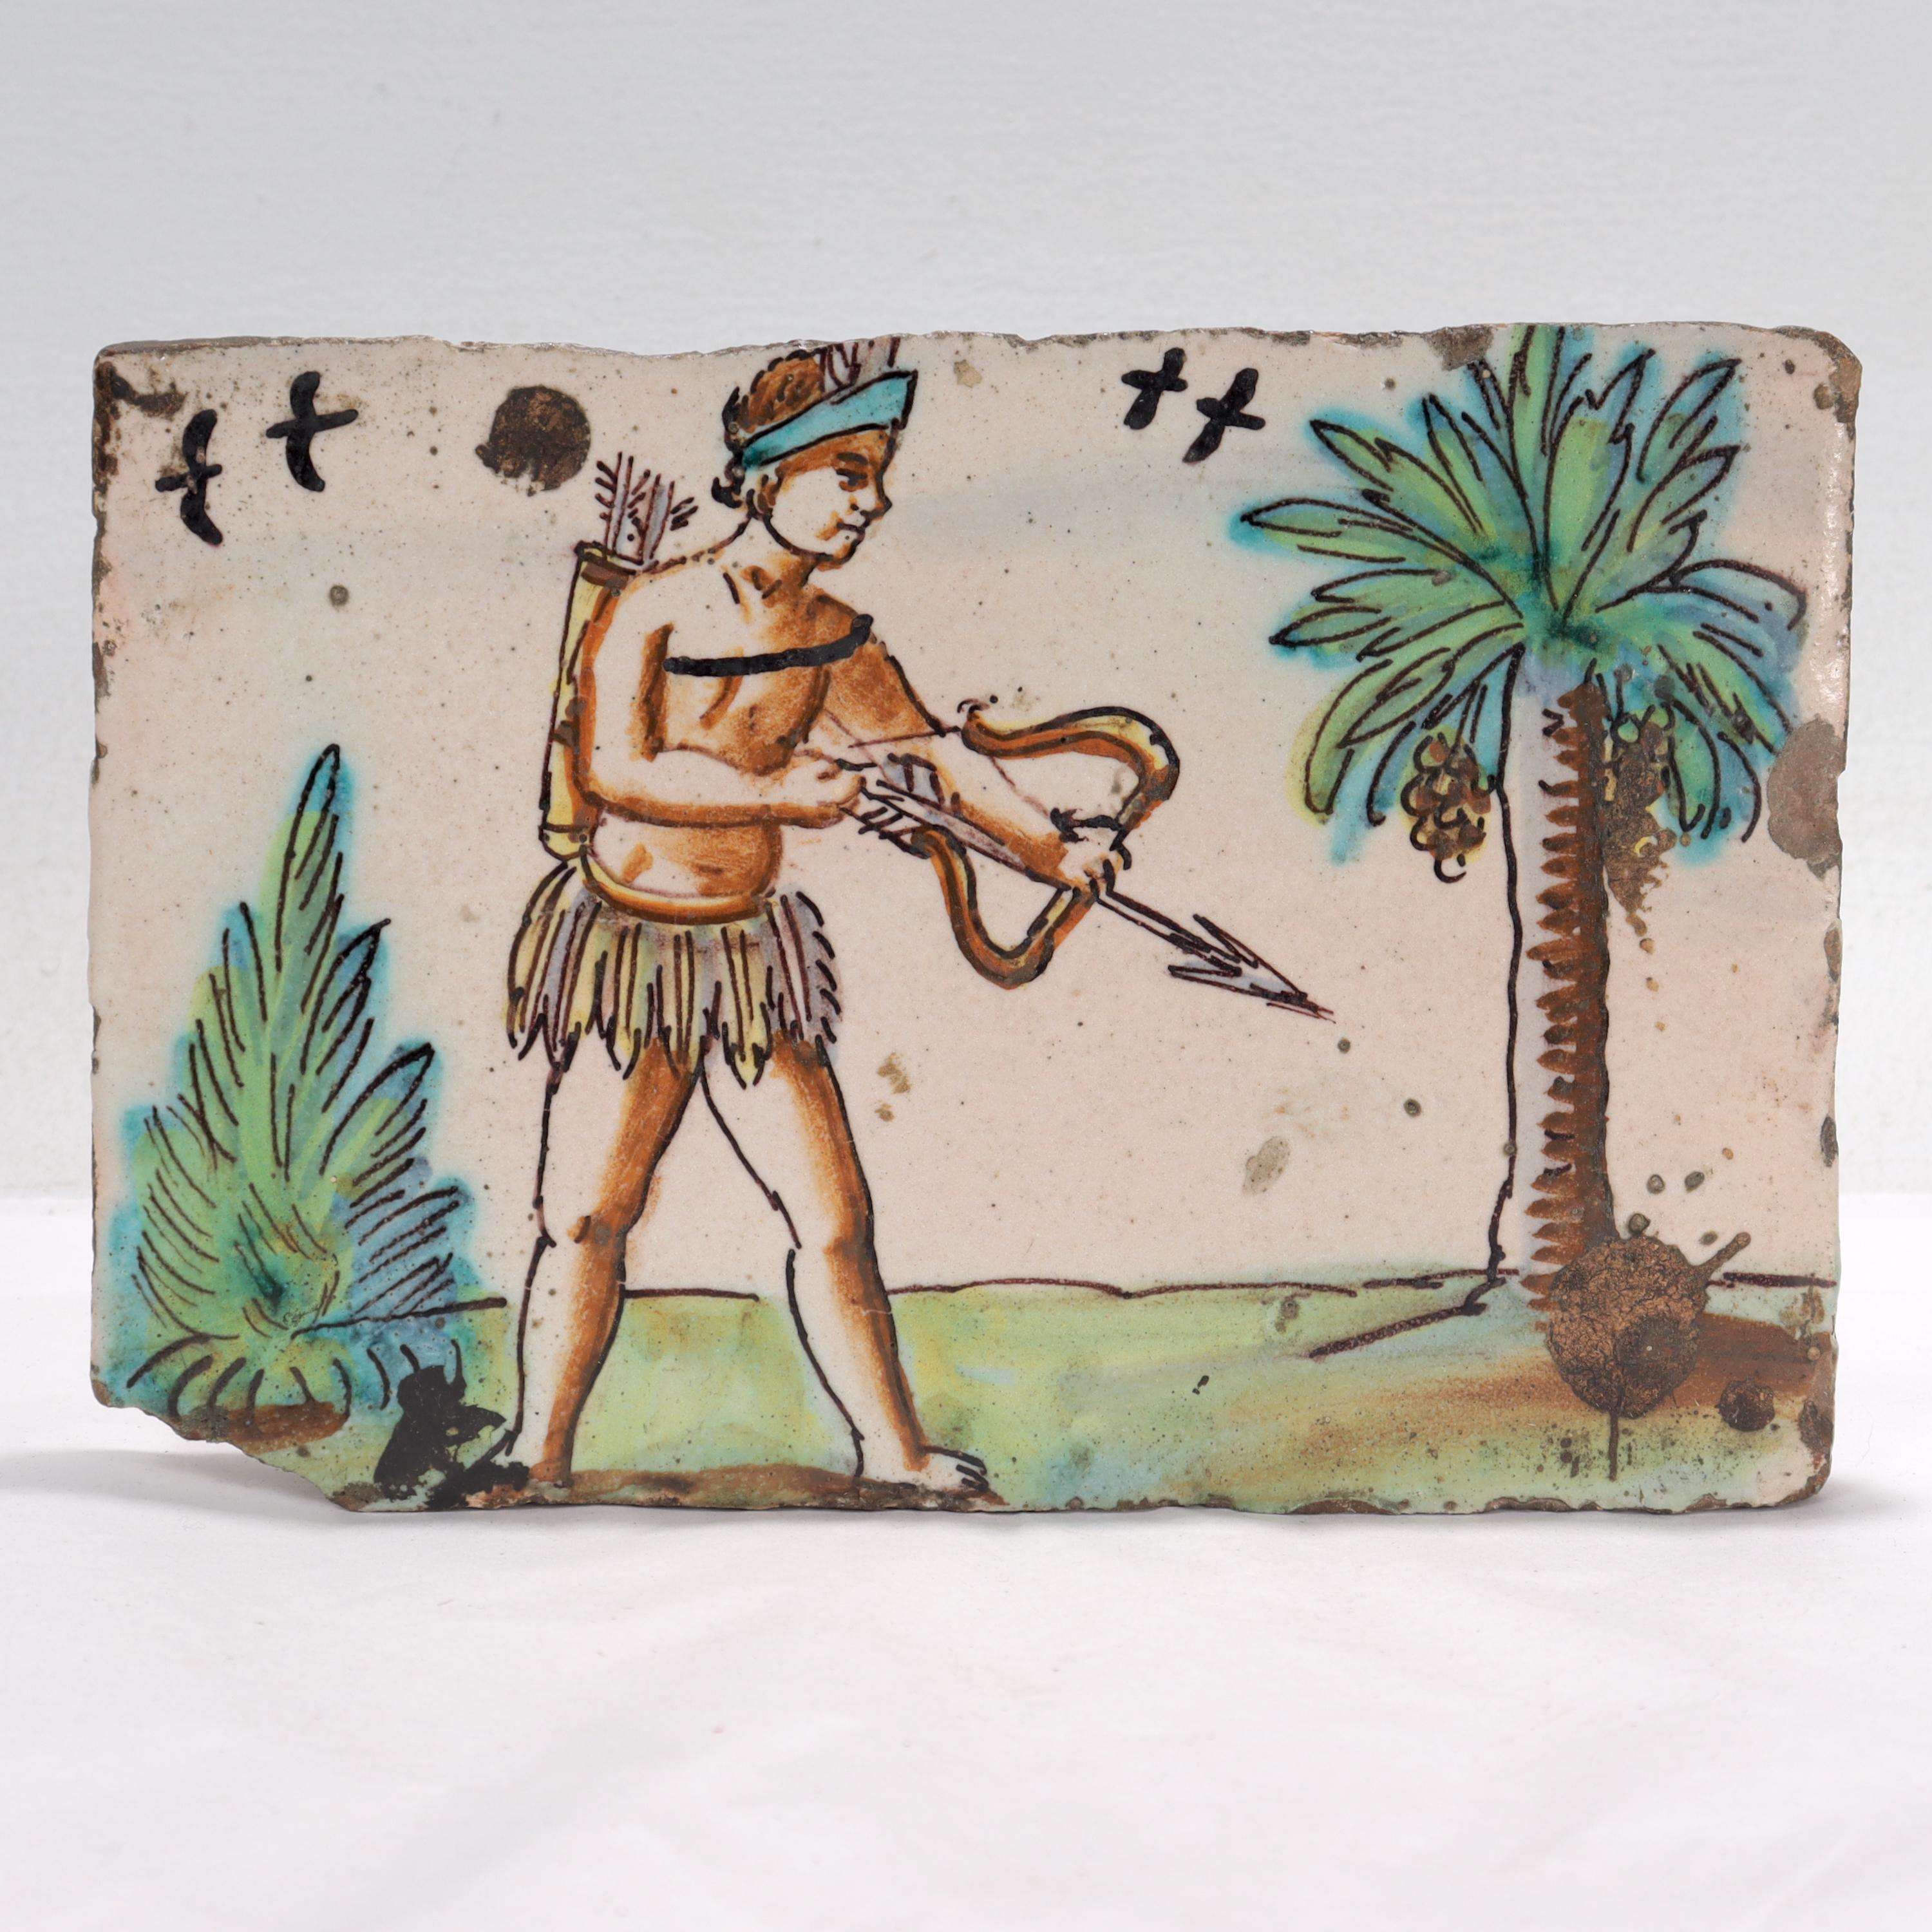 A fine antique 18th century pottery tile.

In terra cotta.

Depicting what appears to be a Native American Indian archer in a grass skirt with birds and plants in the background.

Likely of Dutch origin.

Simply a great antique